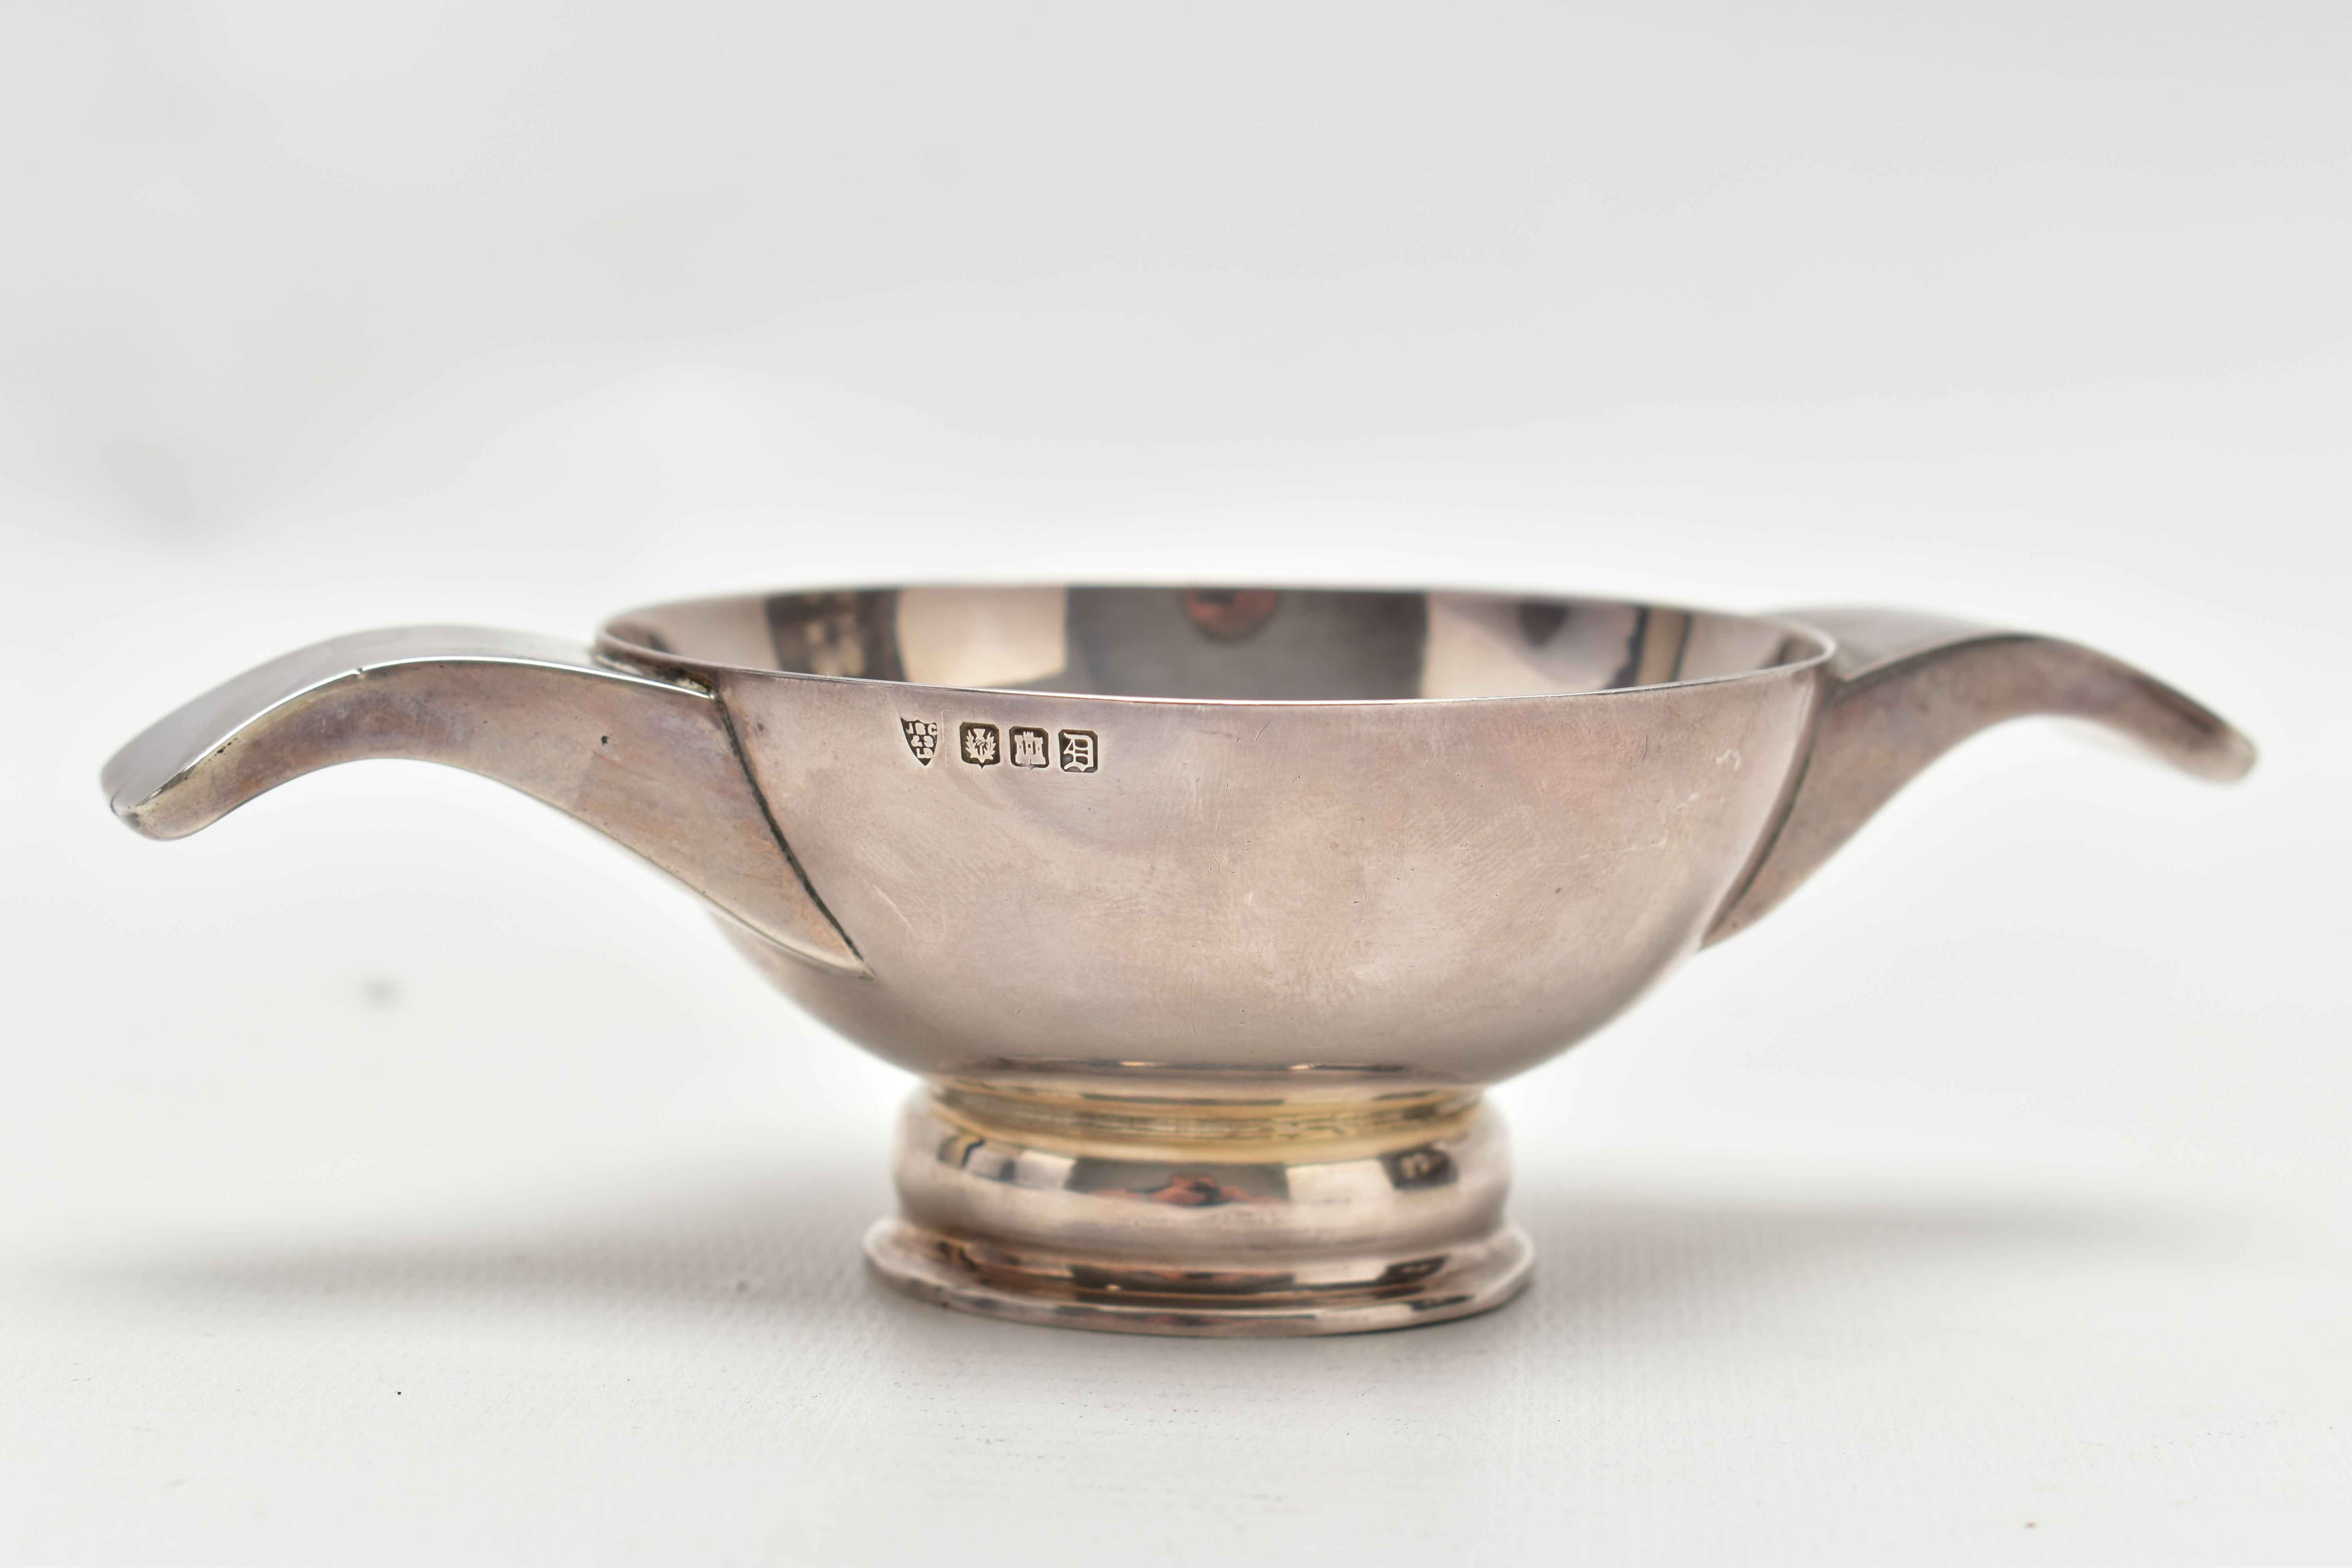 A SCOTTISH SILVER QUAICH, small silver polished Quaich with double handles, hallmarked 'J B